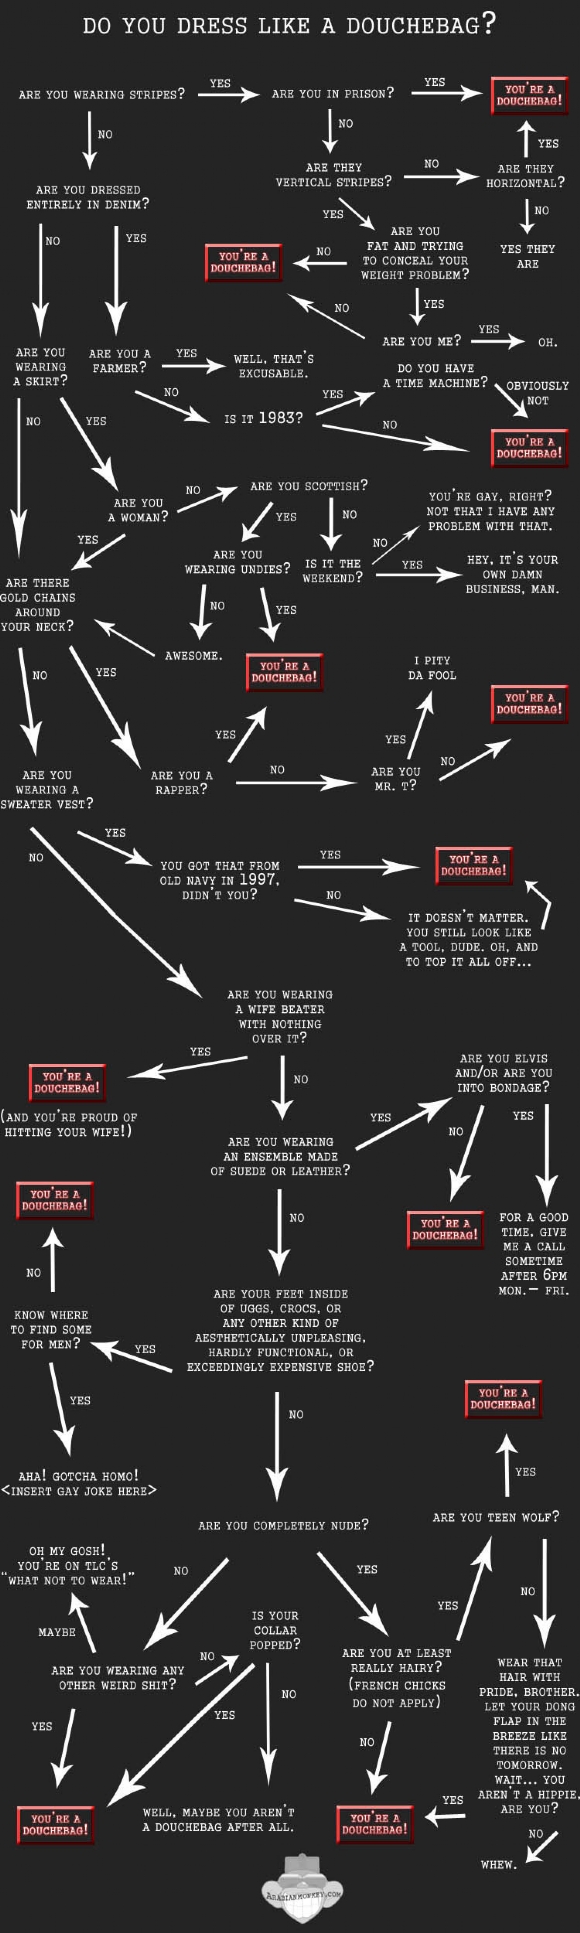 Here's a Flowchart to Help You Figure It Out